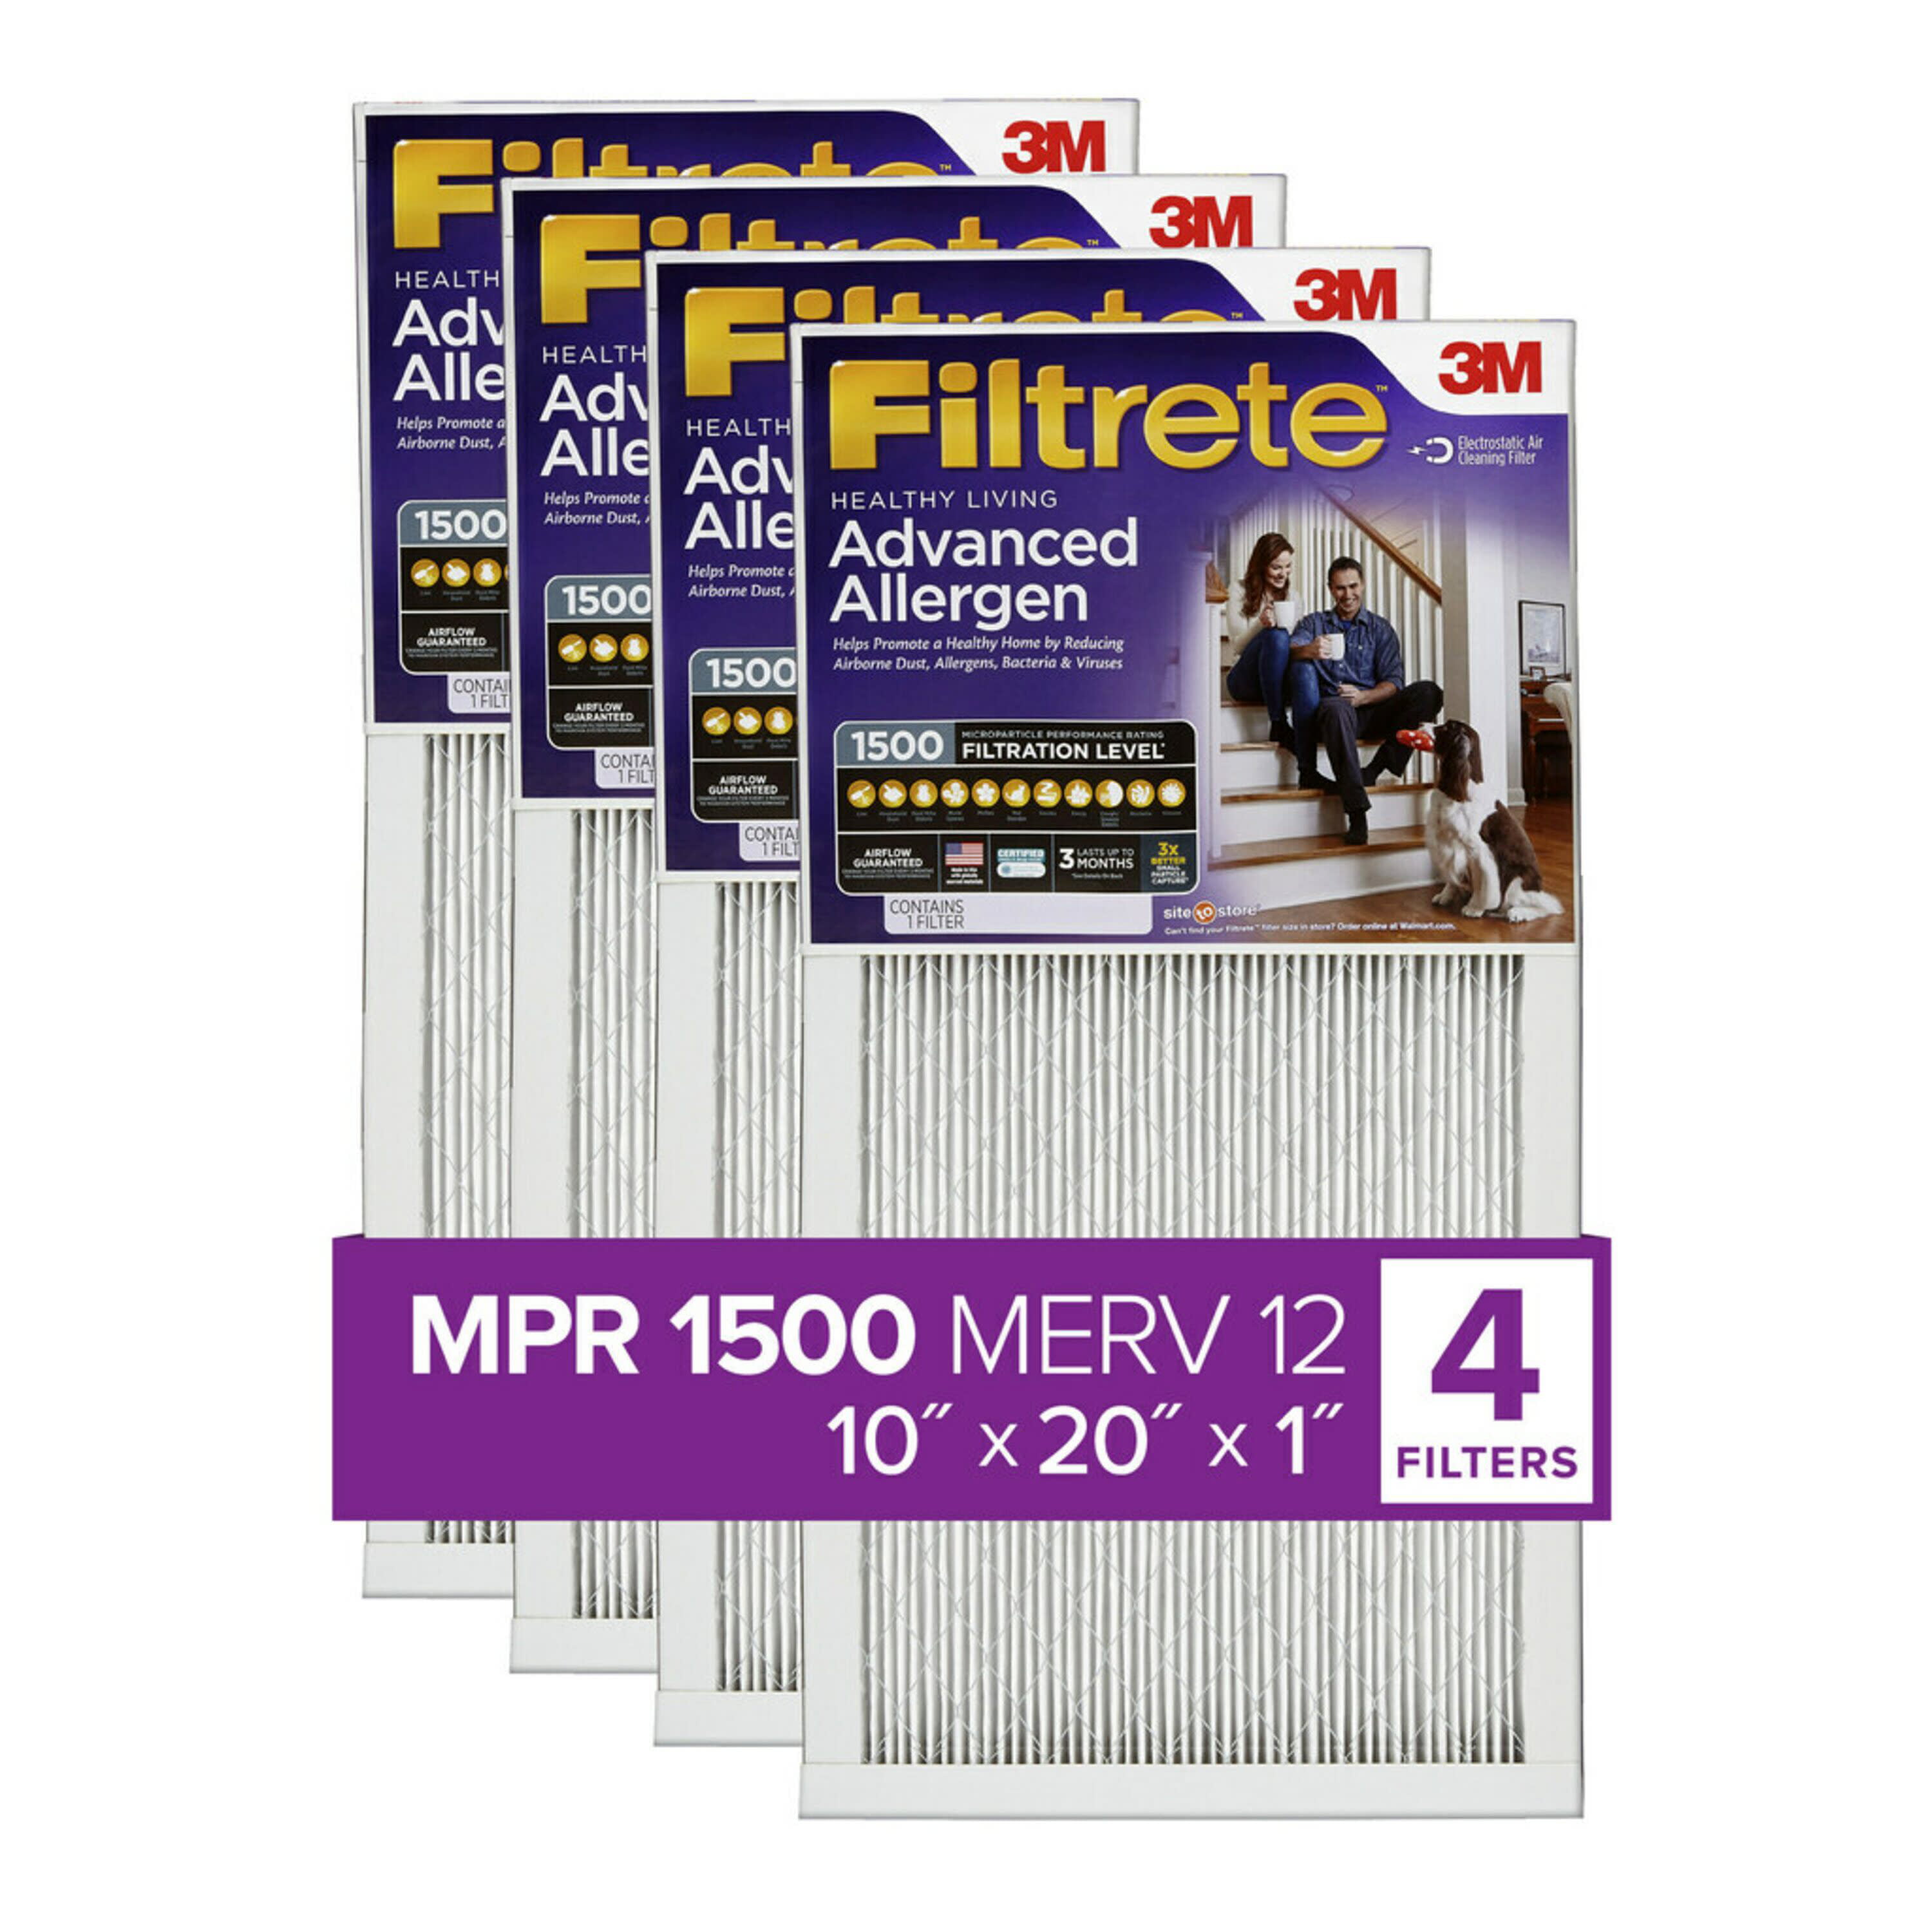 How Long Do 3m Filtrete Filters Last